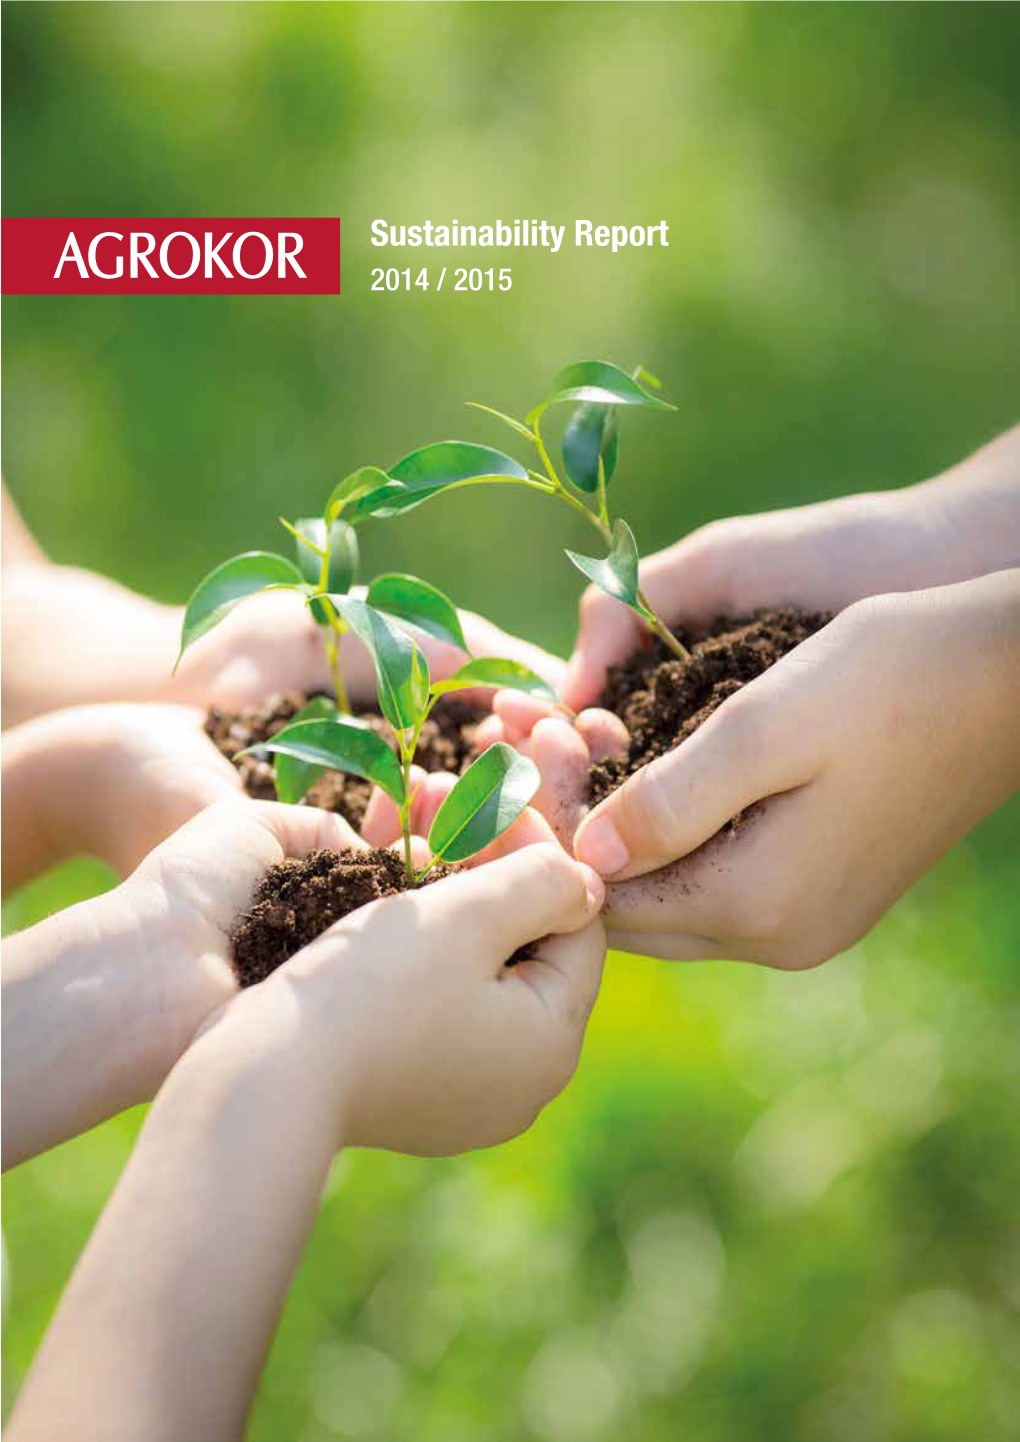 Sustainability Report 2014 / 2015 the Agrokor Group Is the Largest Privately Owned Company in Croatia and One of the Leading Companies in Southeast Europe